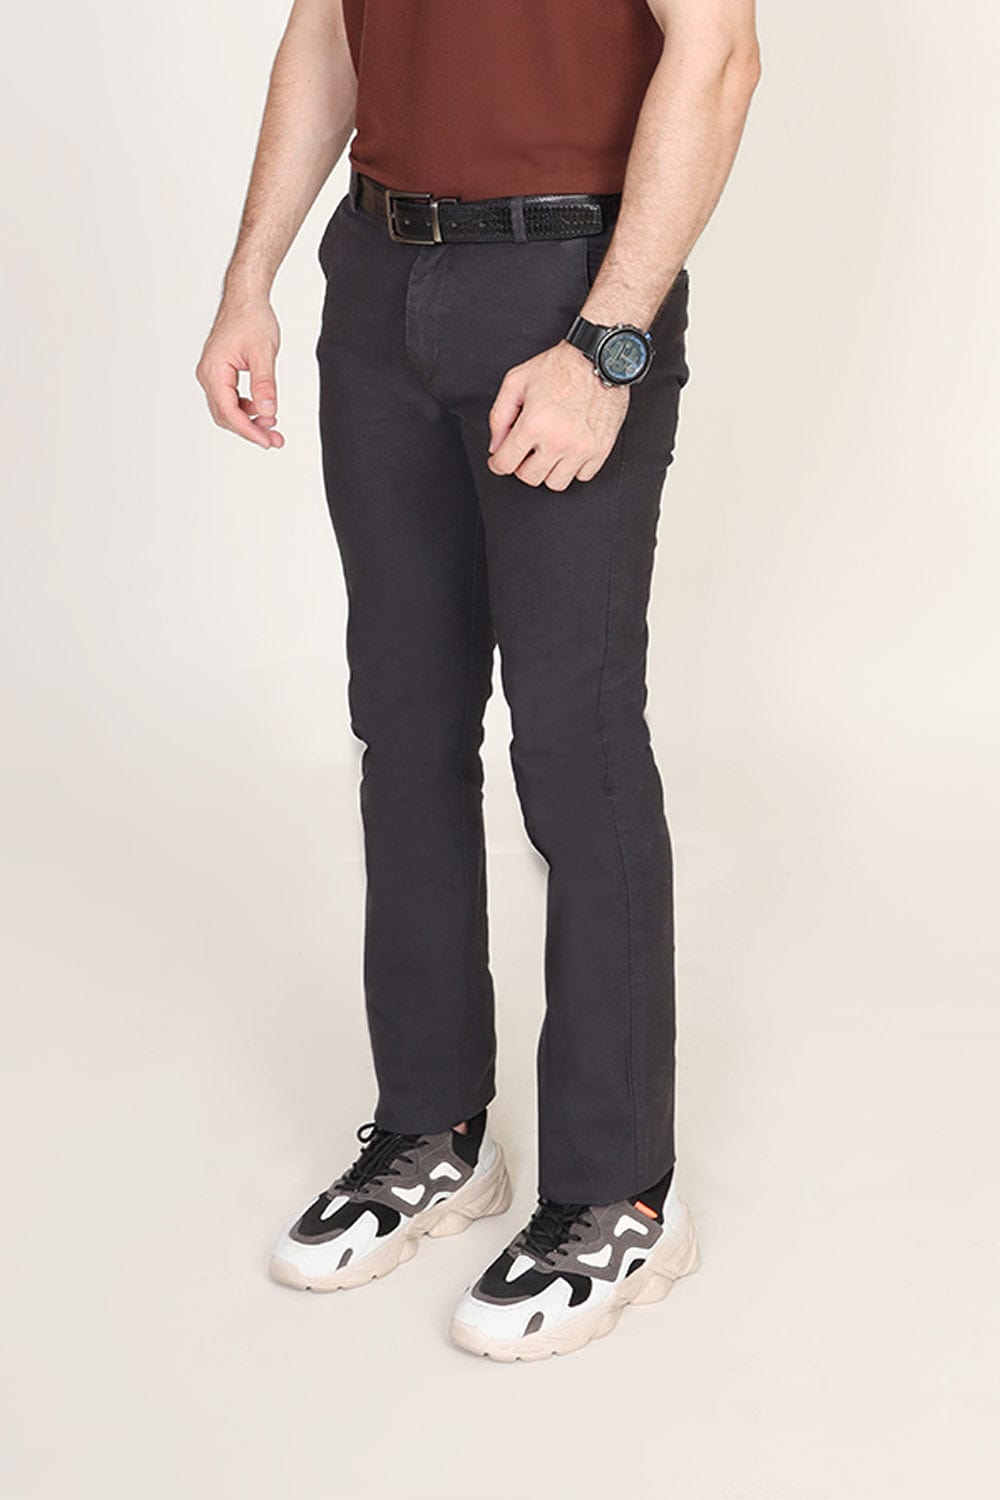 Hope Not Out by Shahid Afridi Men Chino Charcoal Textured Chino